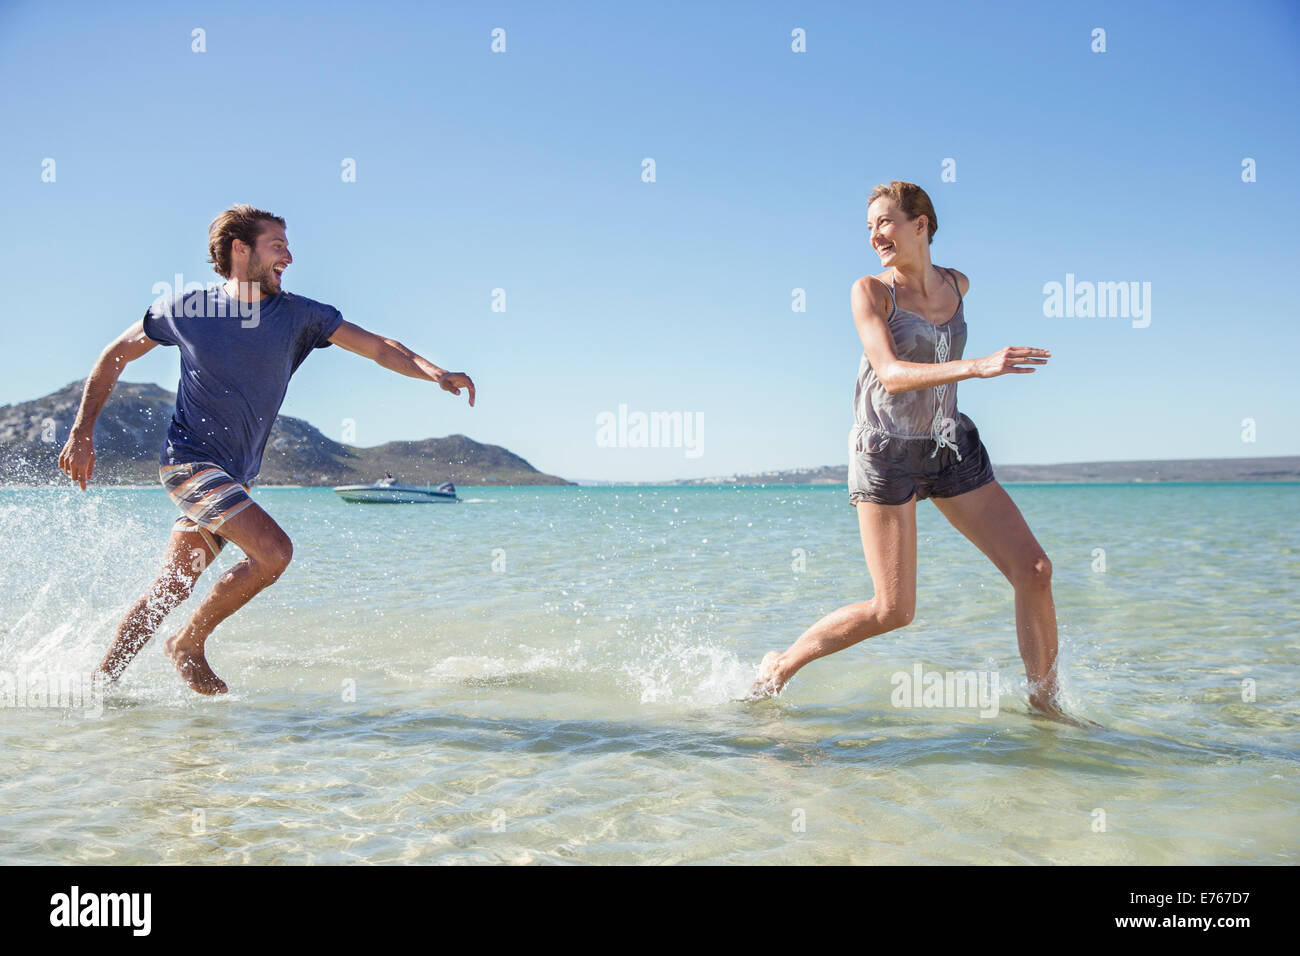 Couple running in waves on beach Banque D'Images